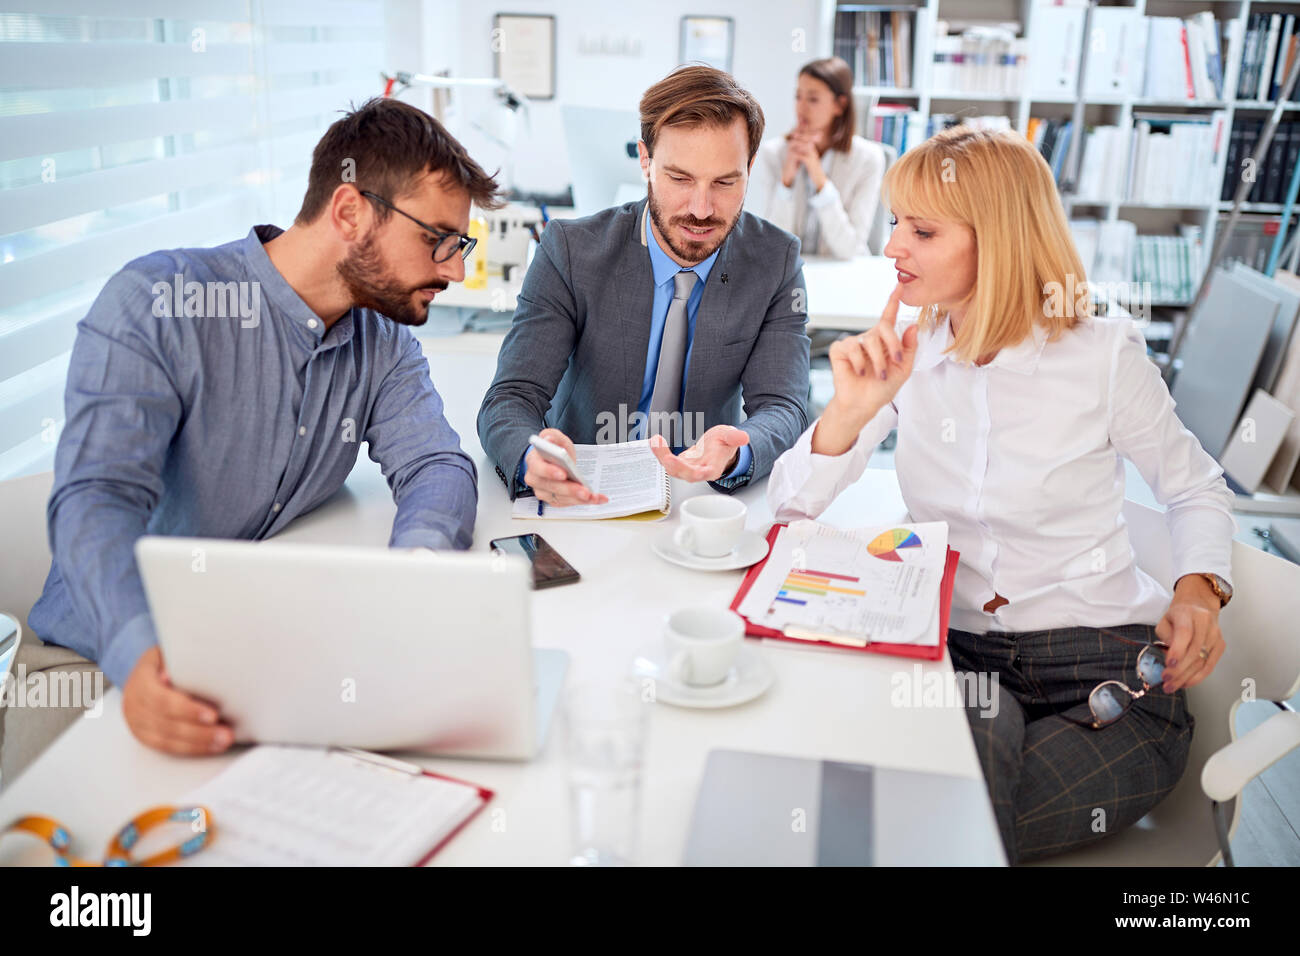 Group of business colleagues have meeting at work Stock Photo